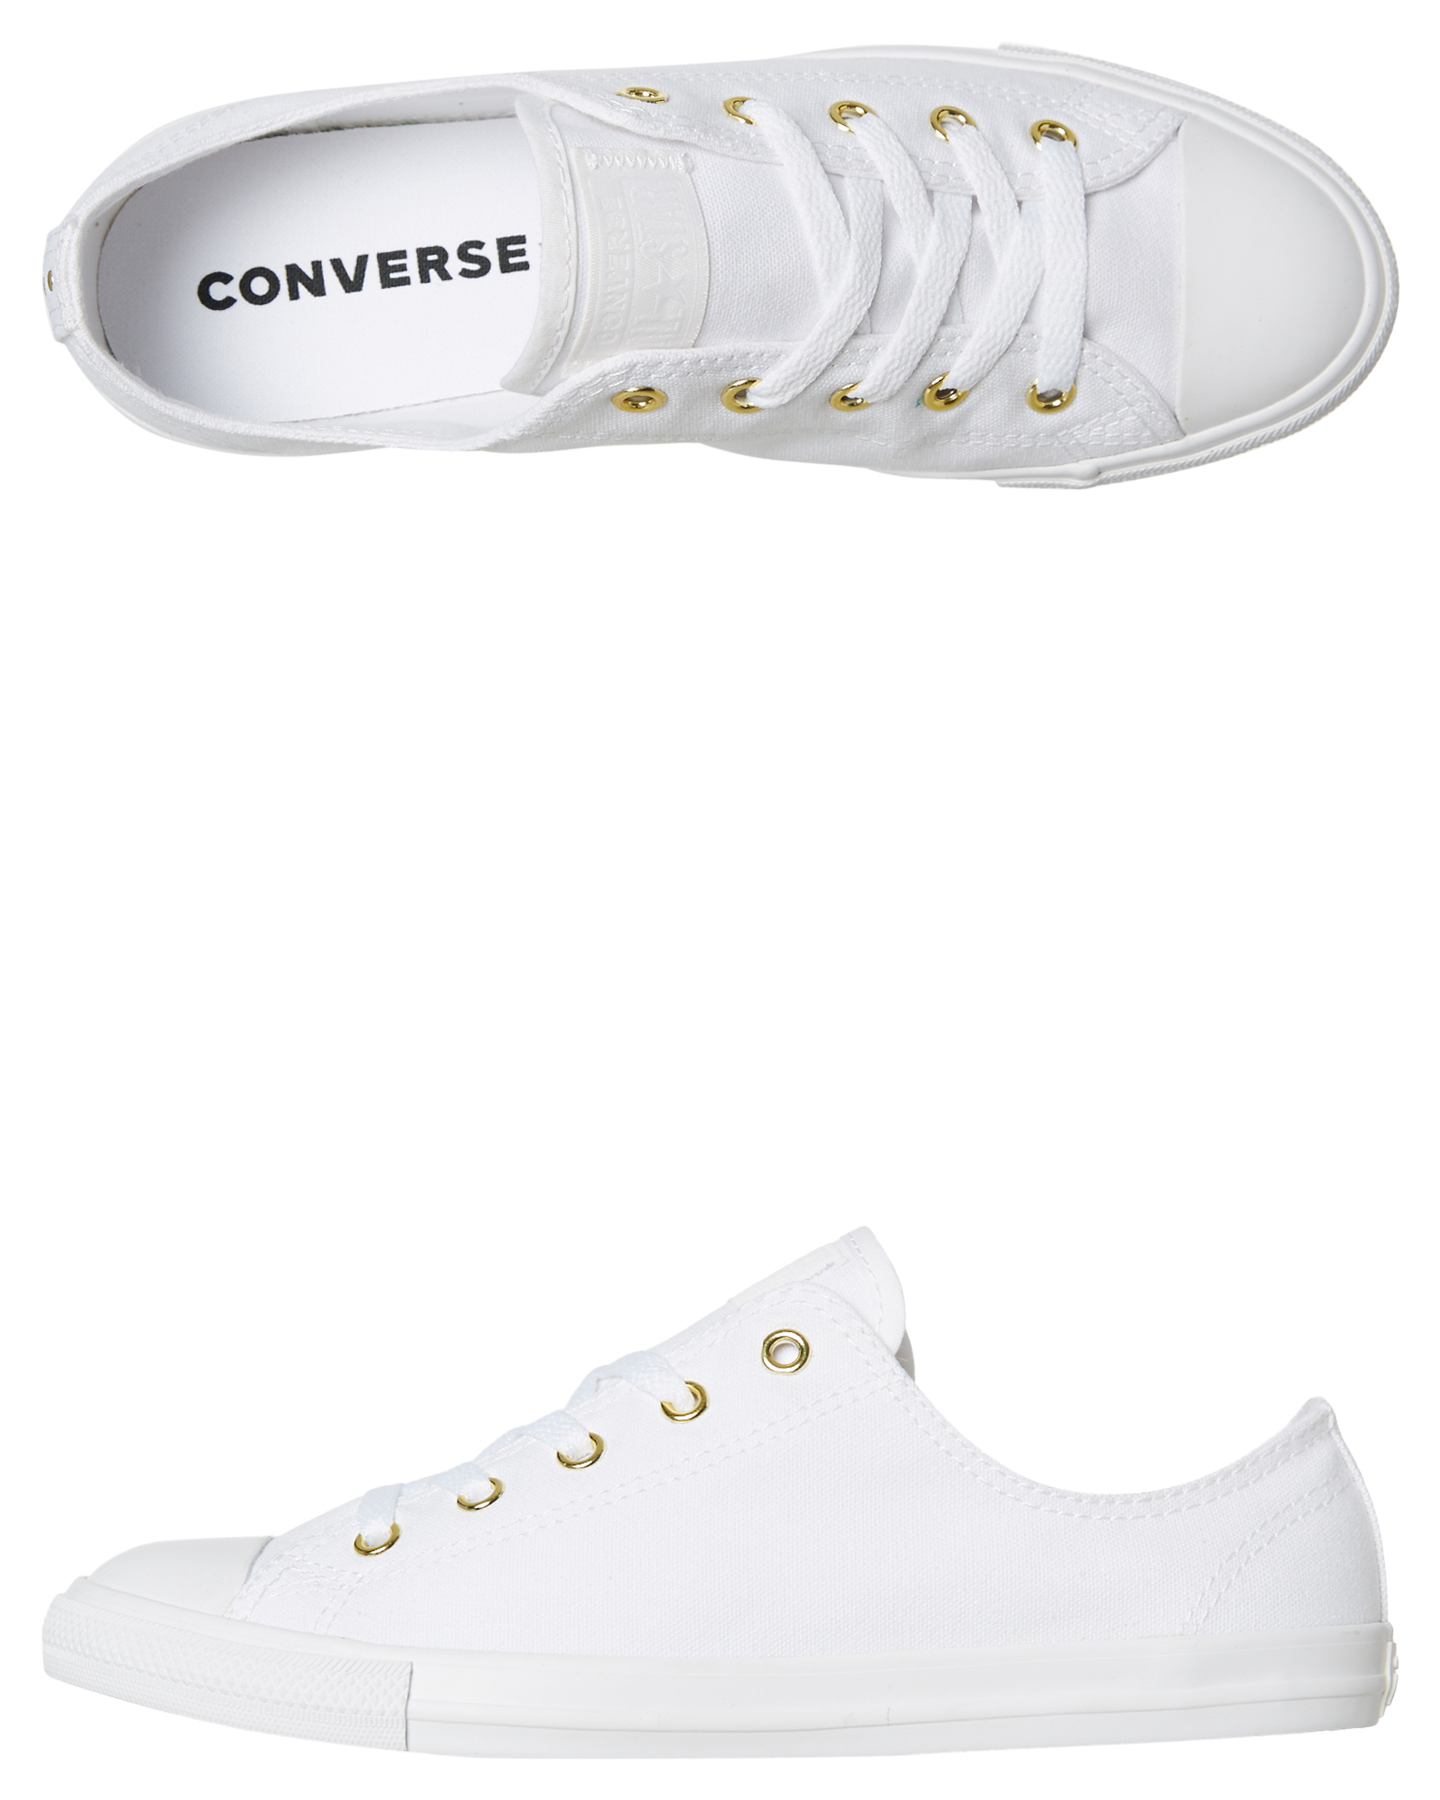 Converse Chuck Taylor All Dainty Shoe - White | SurfStitch